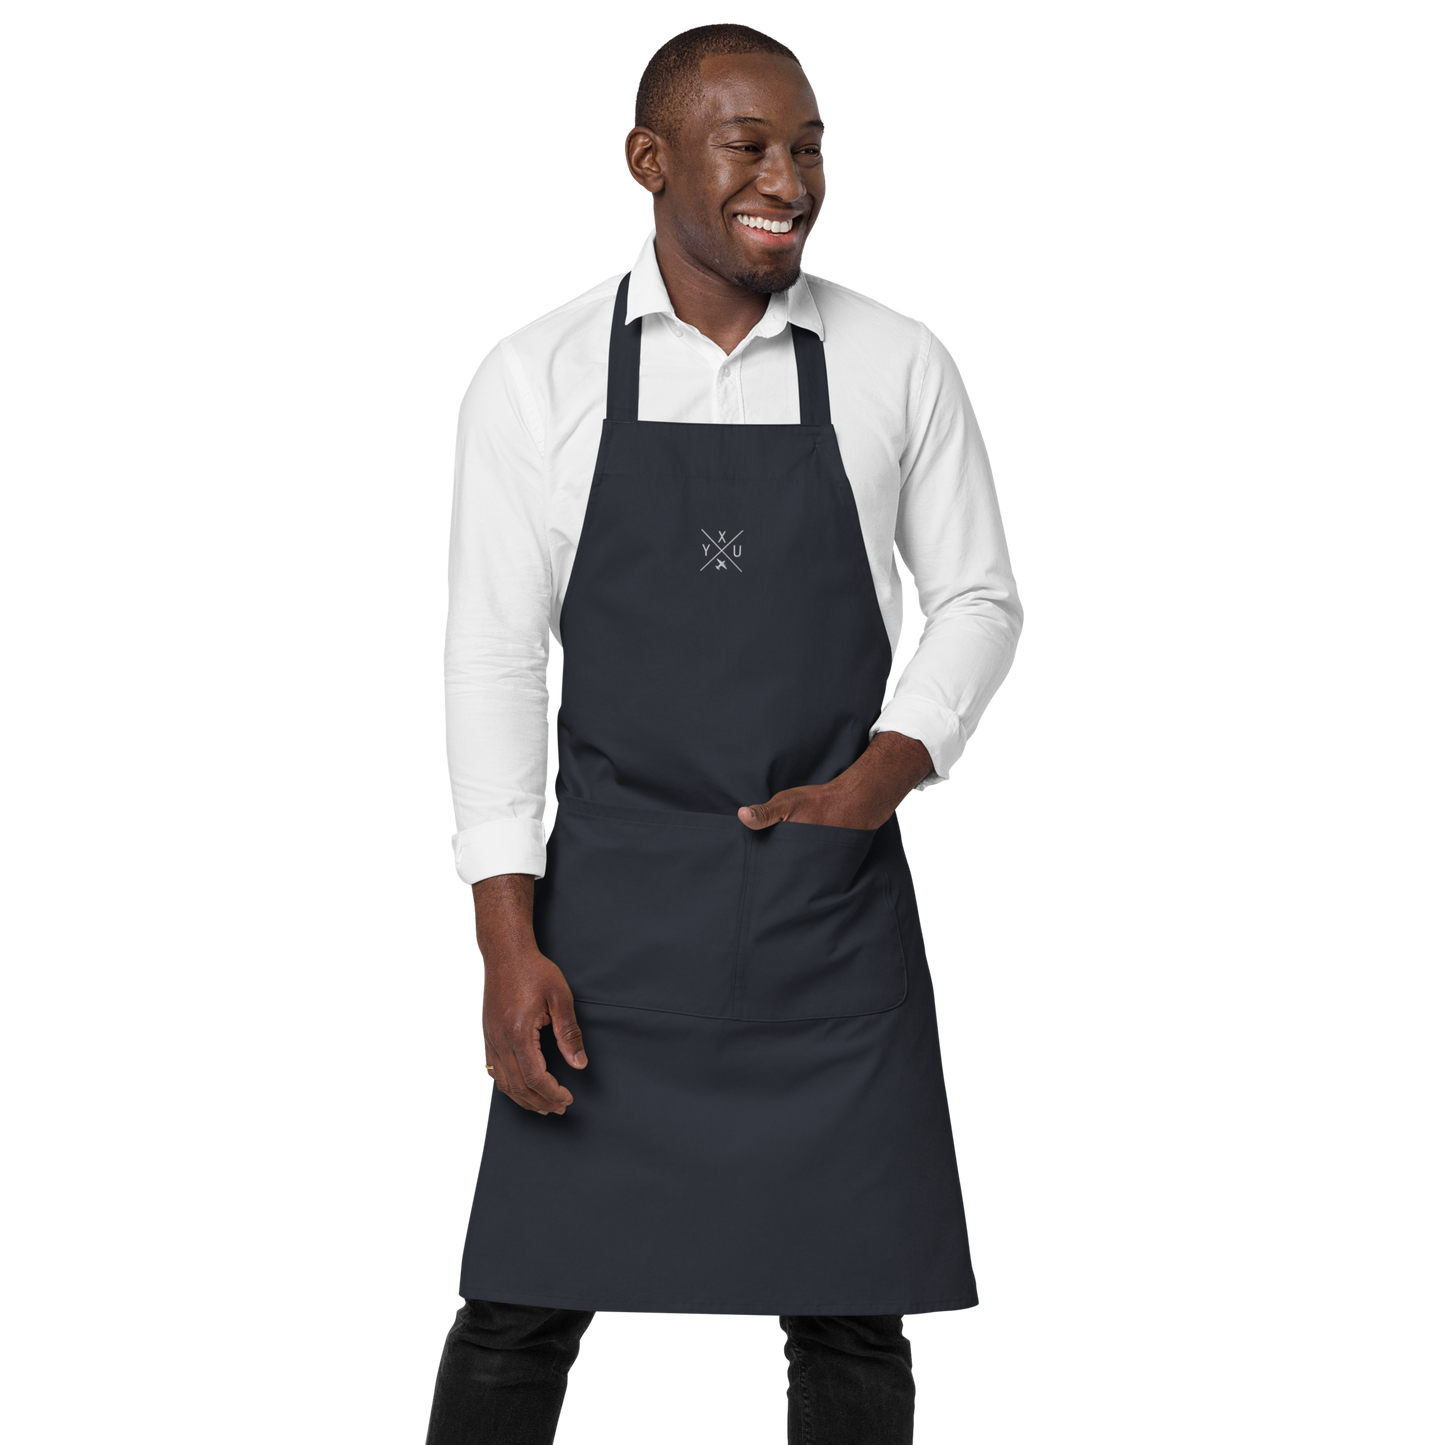 YHM Designs - YXU London Organic Cotton Apron - Crossed-X Design with Airport Code and Vintage Propliner - White Embroidery - Image 11